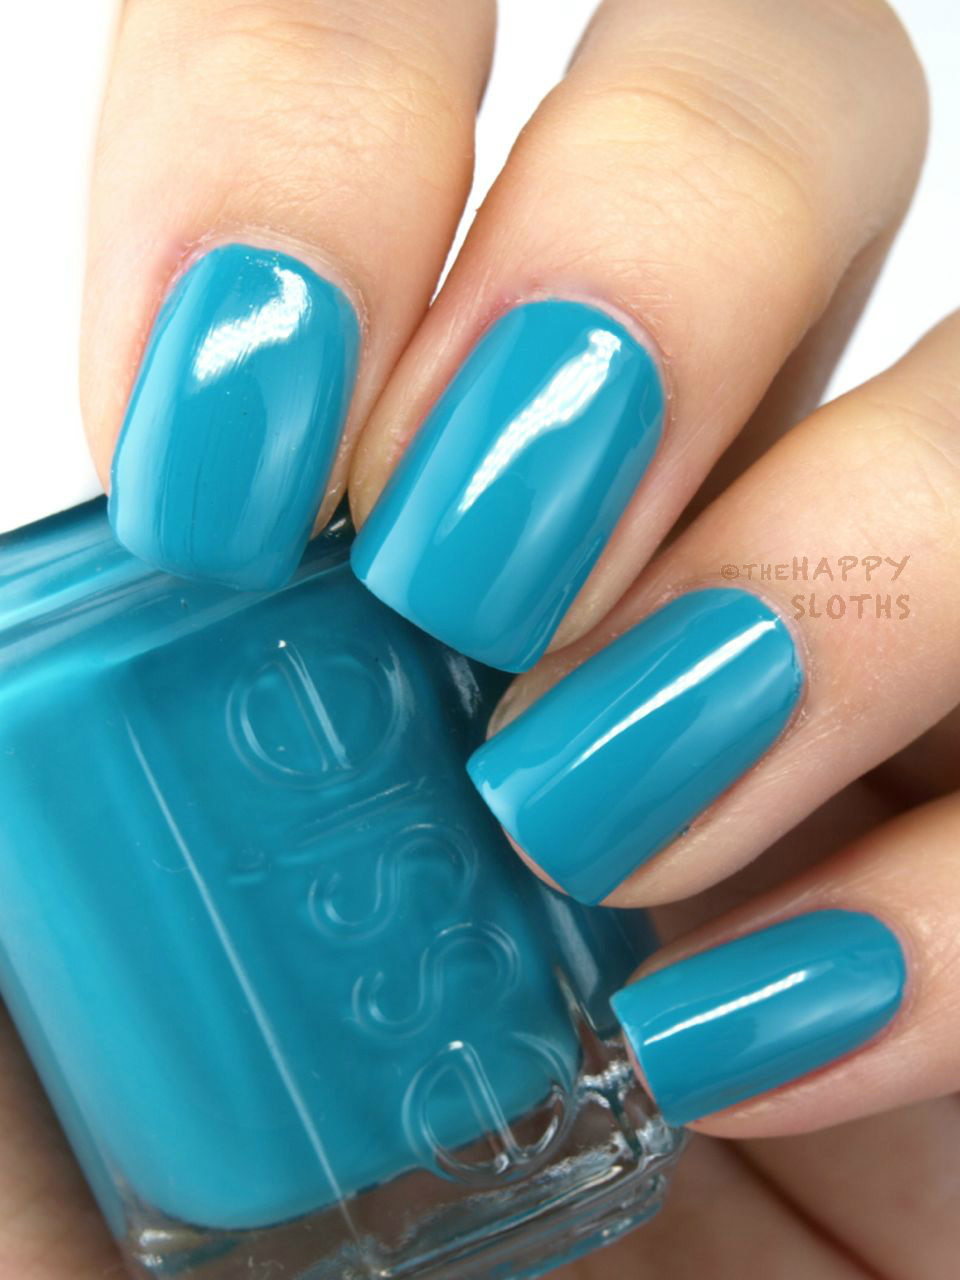 Essie Spring 2015 Collection Part I: Review and Swatches